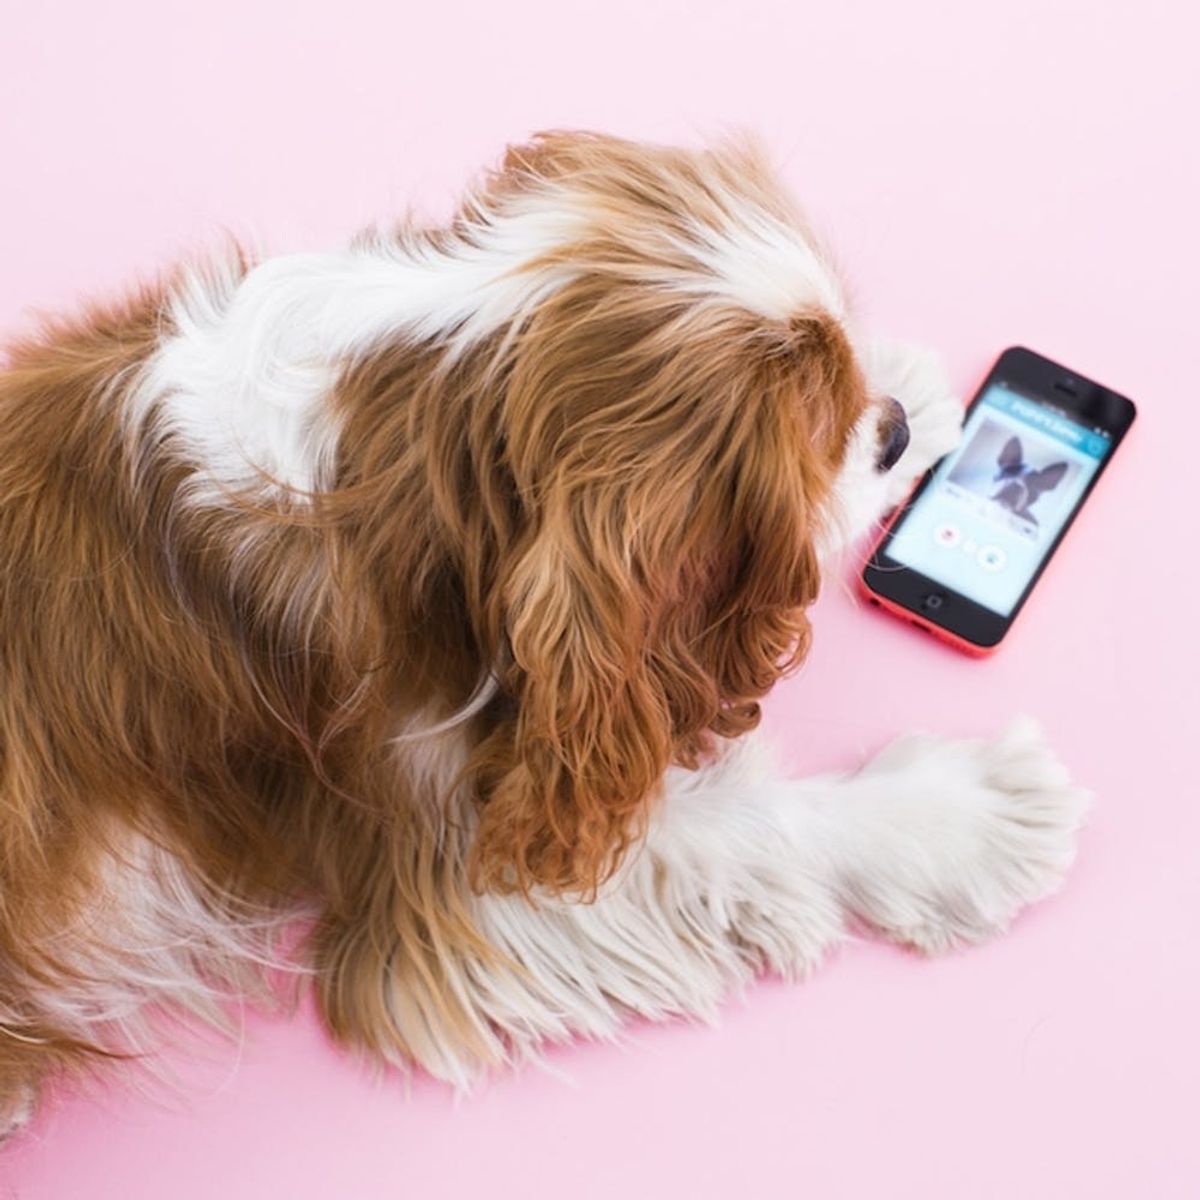 Pet Owners: This App Gives You 24/7 Vet Access on Your Phone